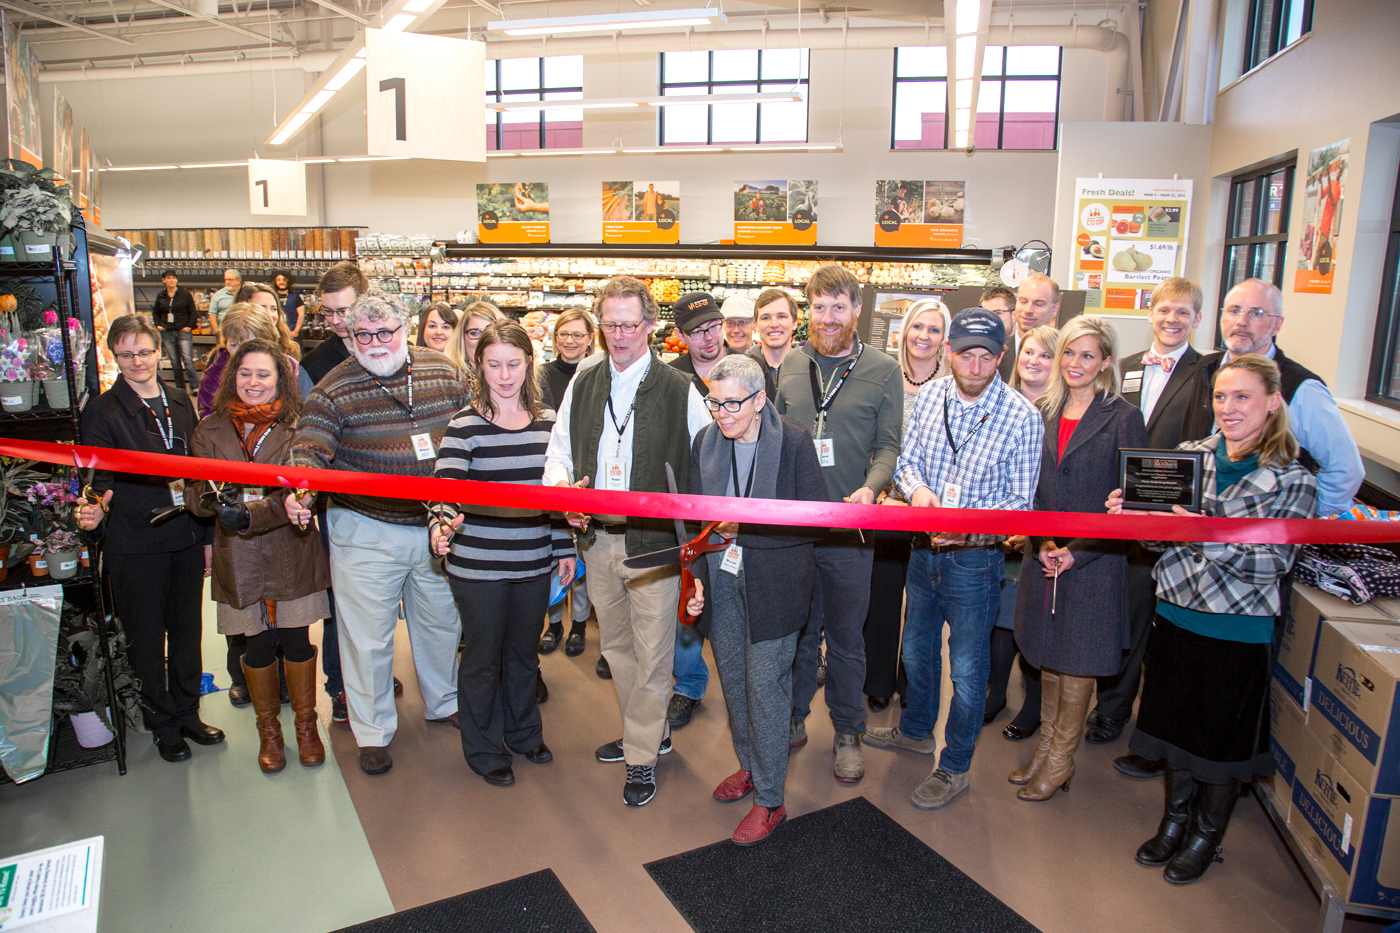 A group of people, including officials and store employees, gather at Whole Foods Coop Duluth MN for a ribbon-cutting ceremony. They are standing behind a large red ribbon, some holding the scissors. The store aisles are visible in the background with products on the shelves.